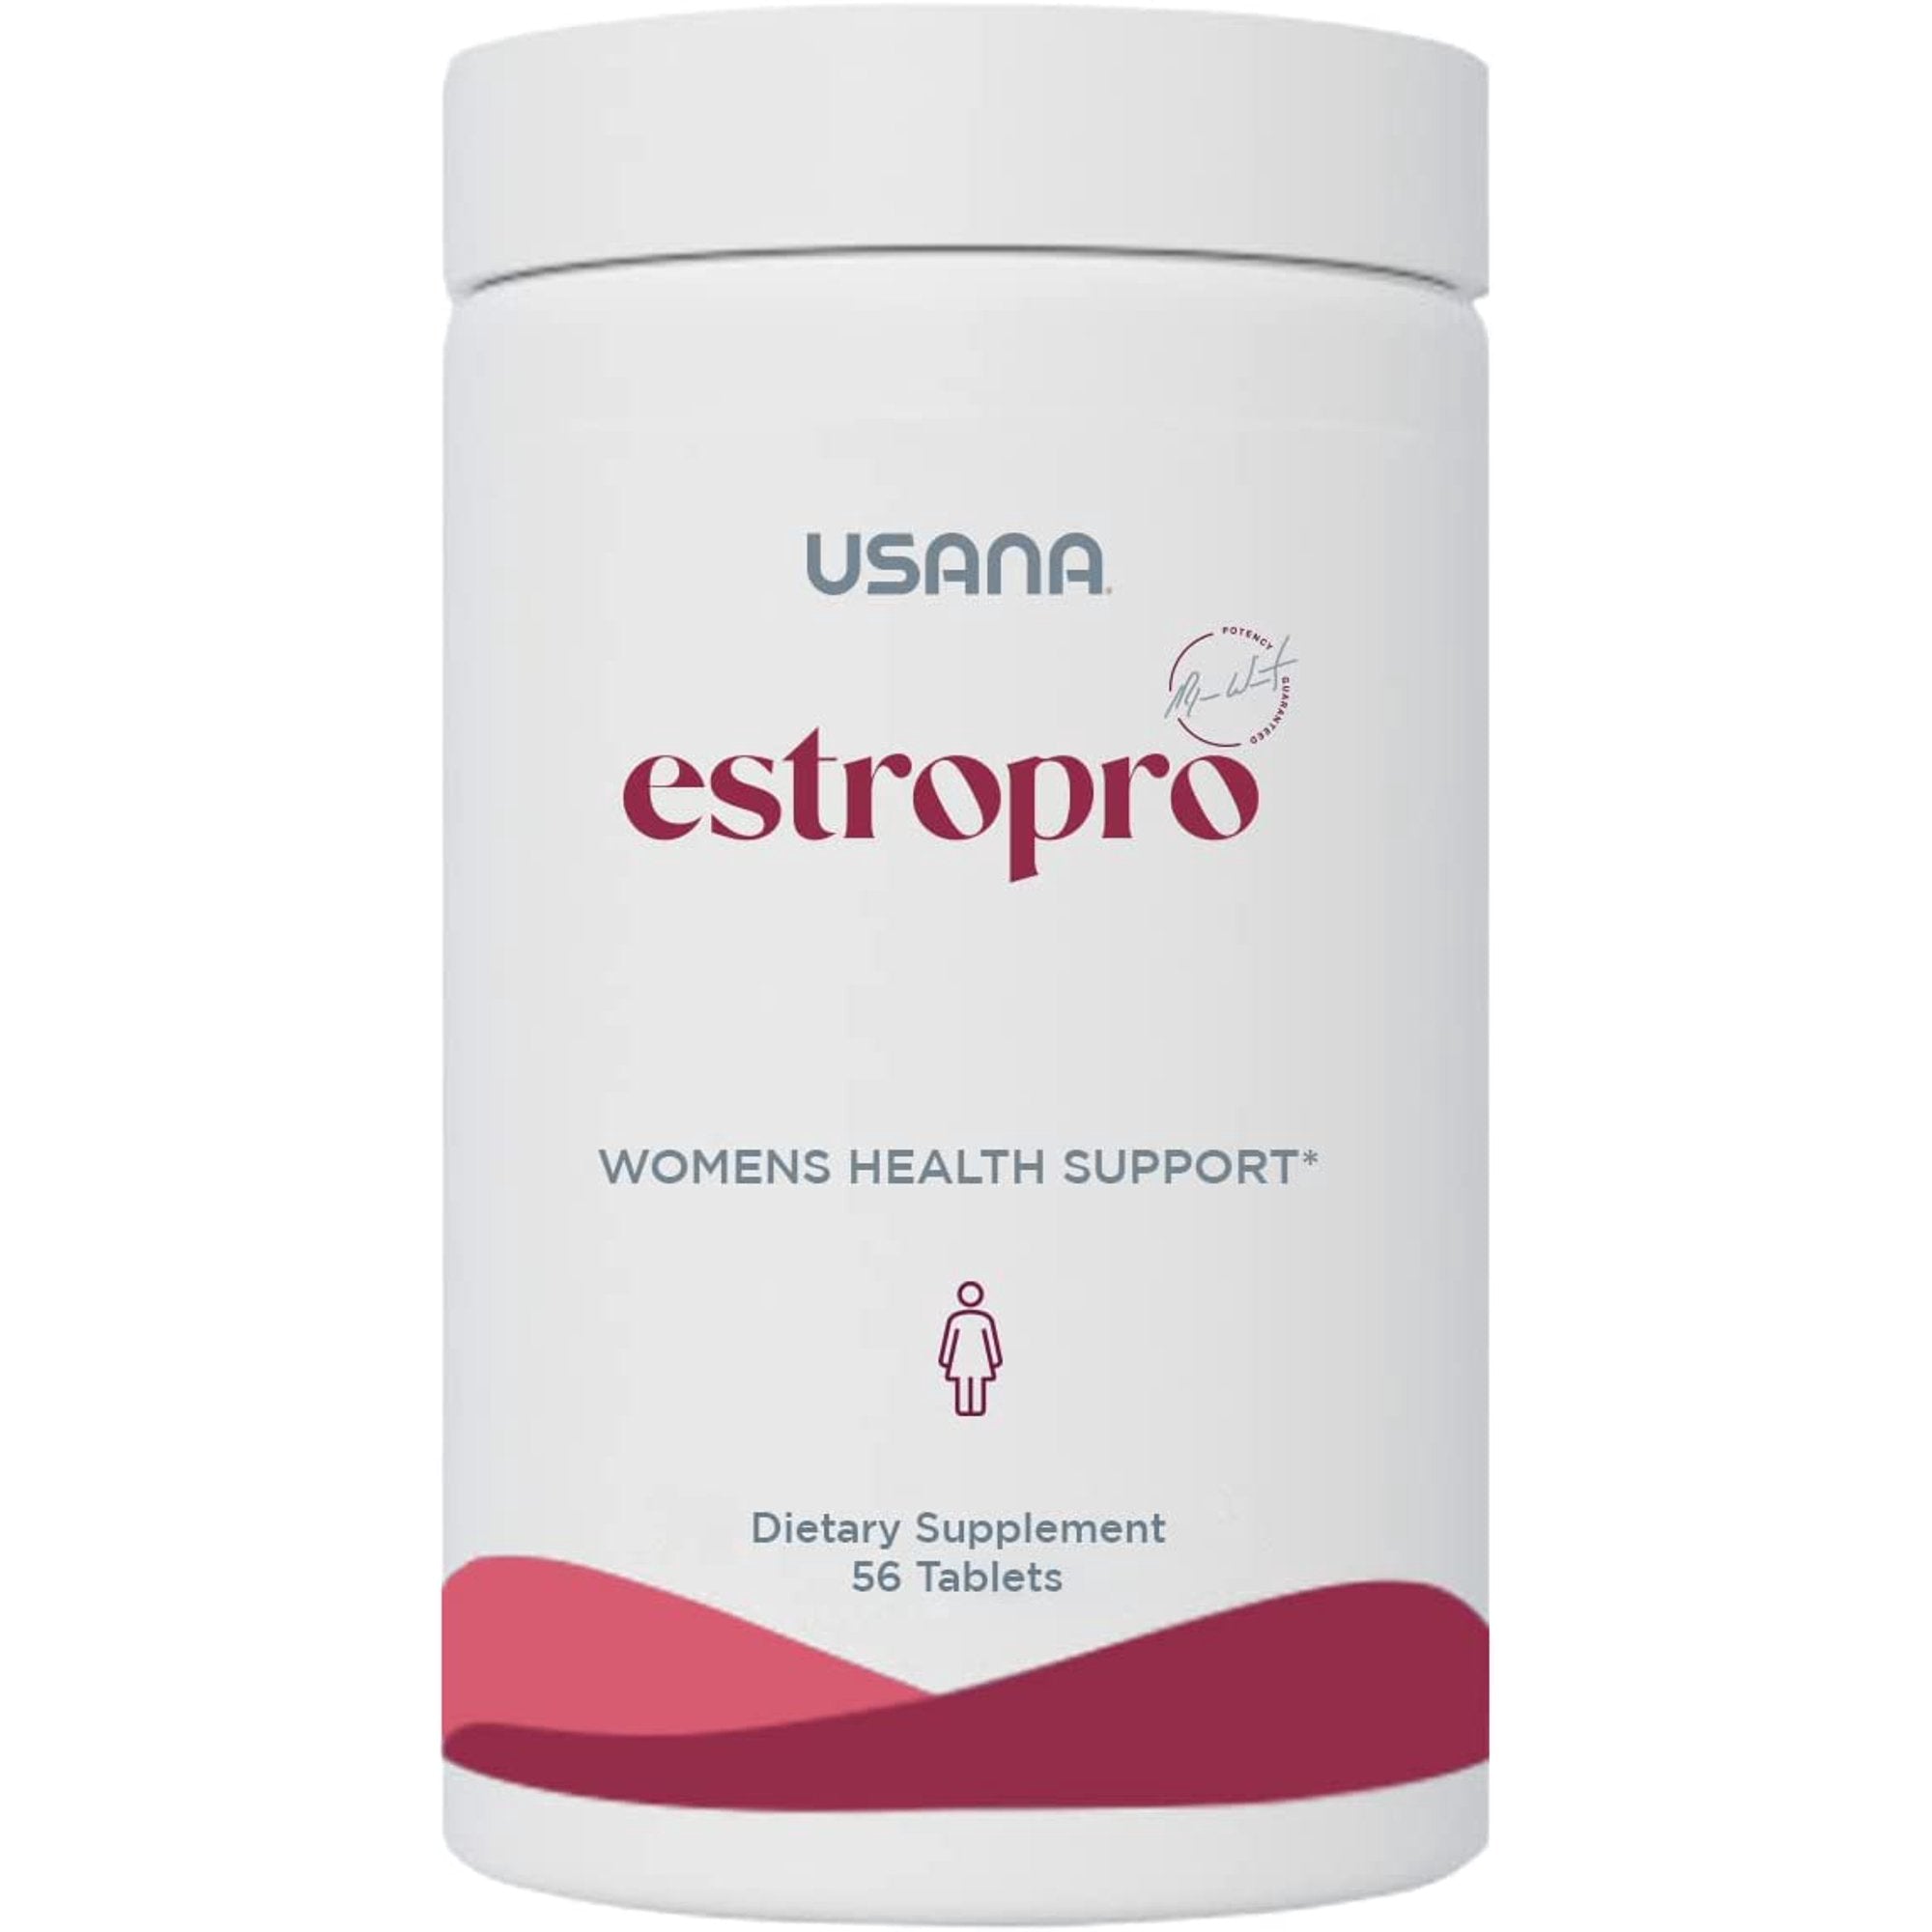 Estropro Plant Based Women's Health Support For Menopause, 56 Tablets